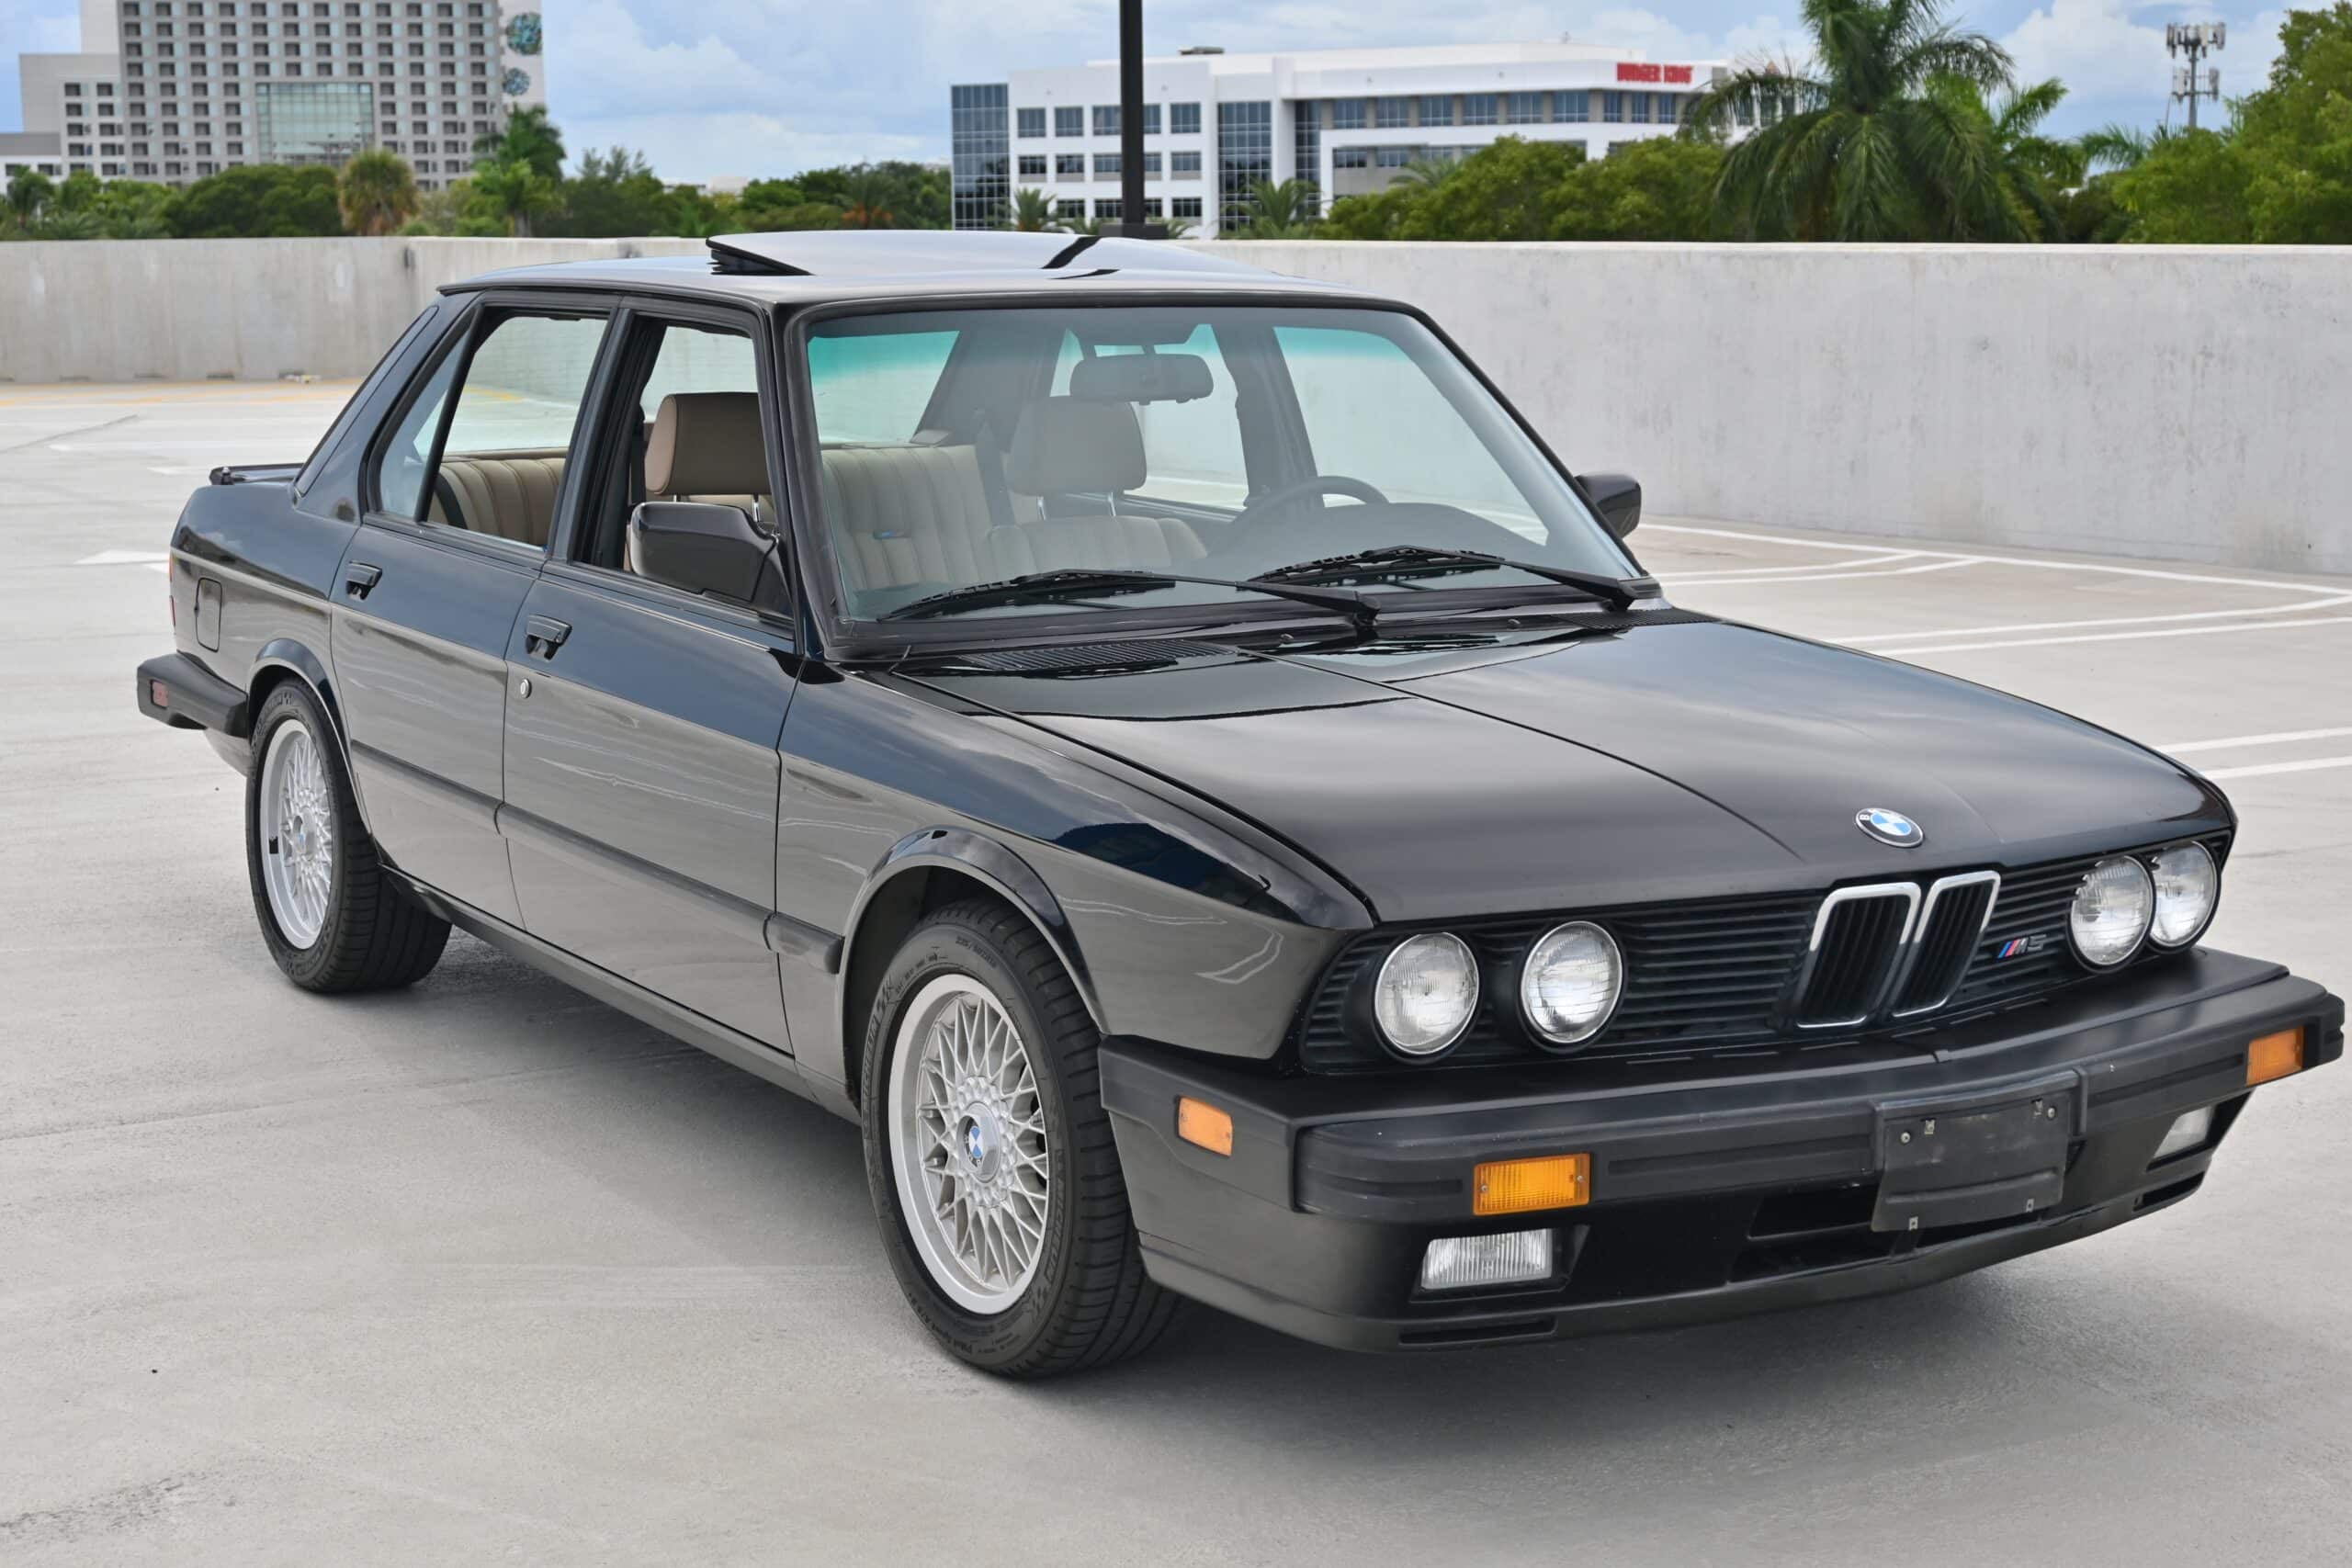 1988 BMW M5 Original Paint / Stock / 1 owner for 30 years / Handbuilt 1 of 1340 US Cars